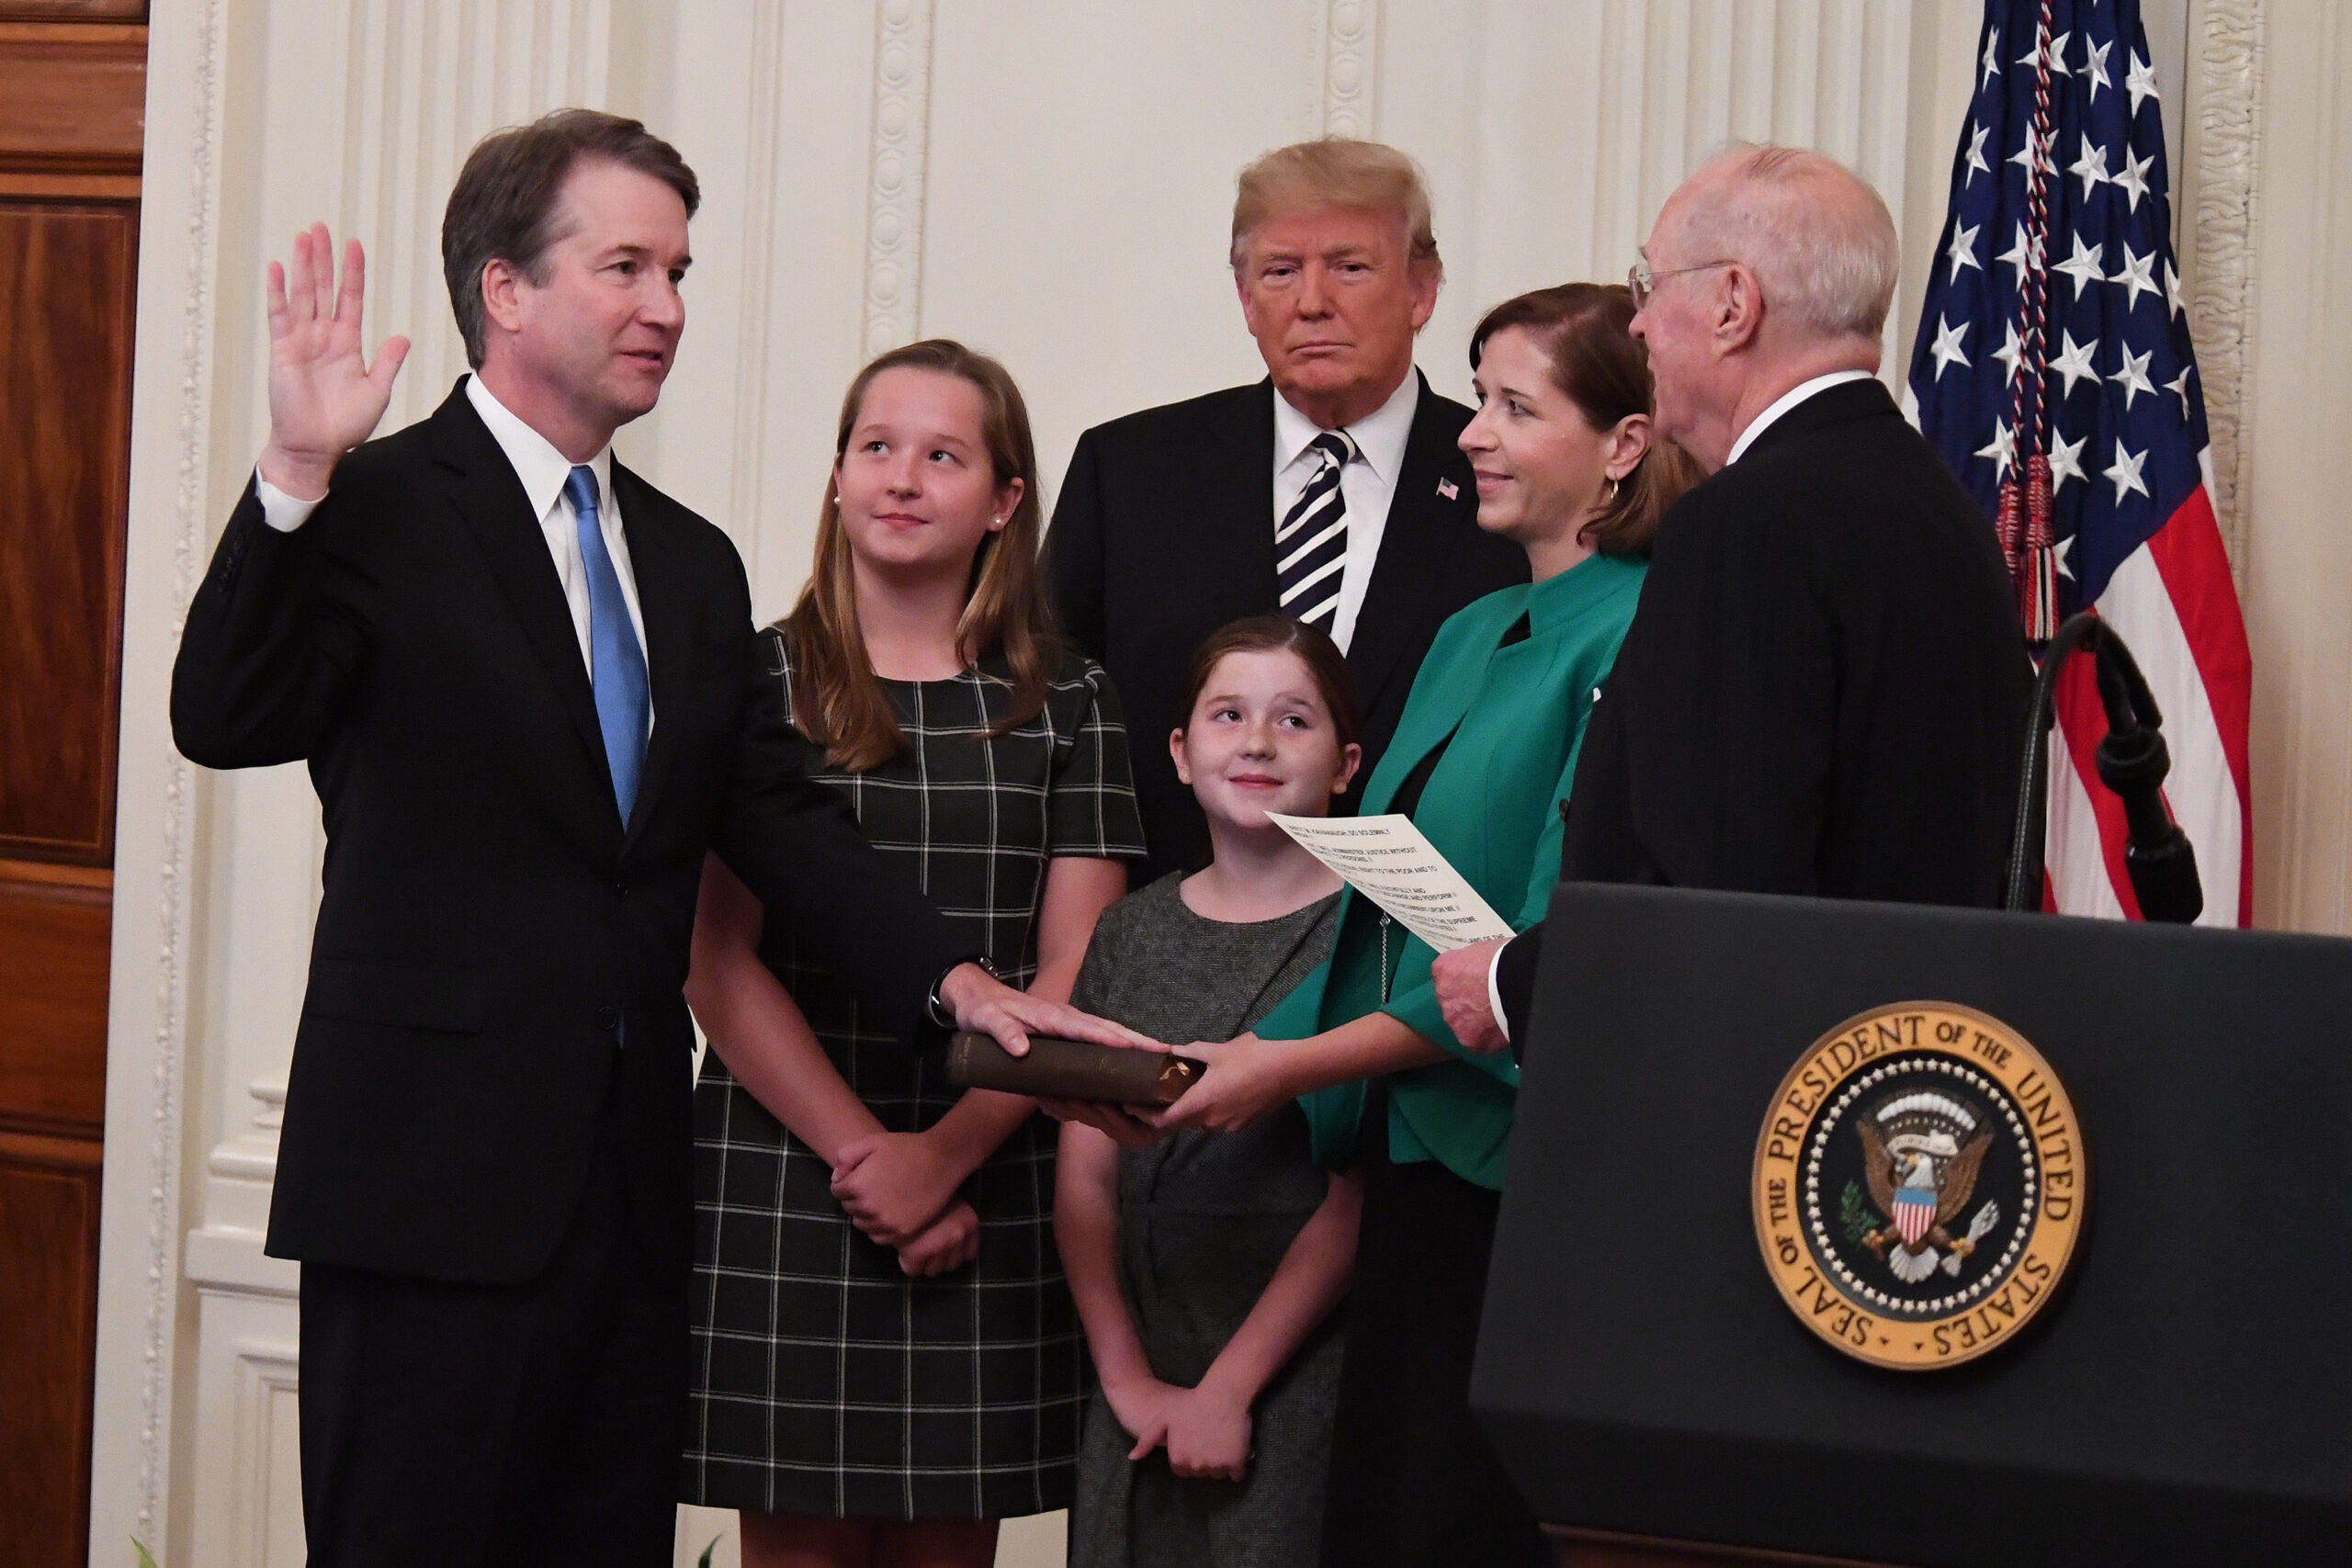 udge BRETT KAVANAUGH is sworn in as an Associate Justice on the U.S. Supreme Court replacing Justice A. Kennedy. (Credit Image: © Christy Bowe/Globe Photos via ZUMA Wire)